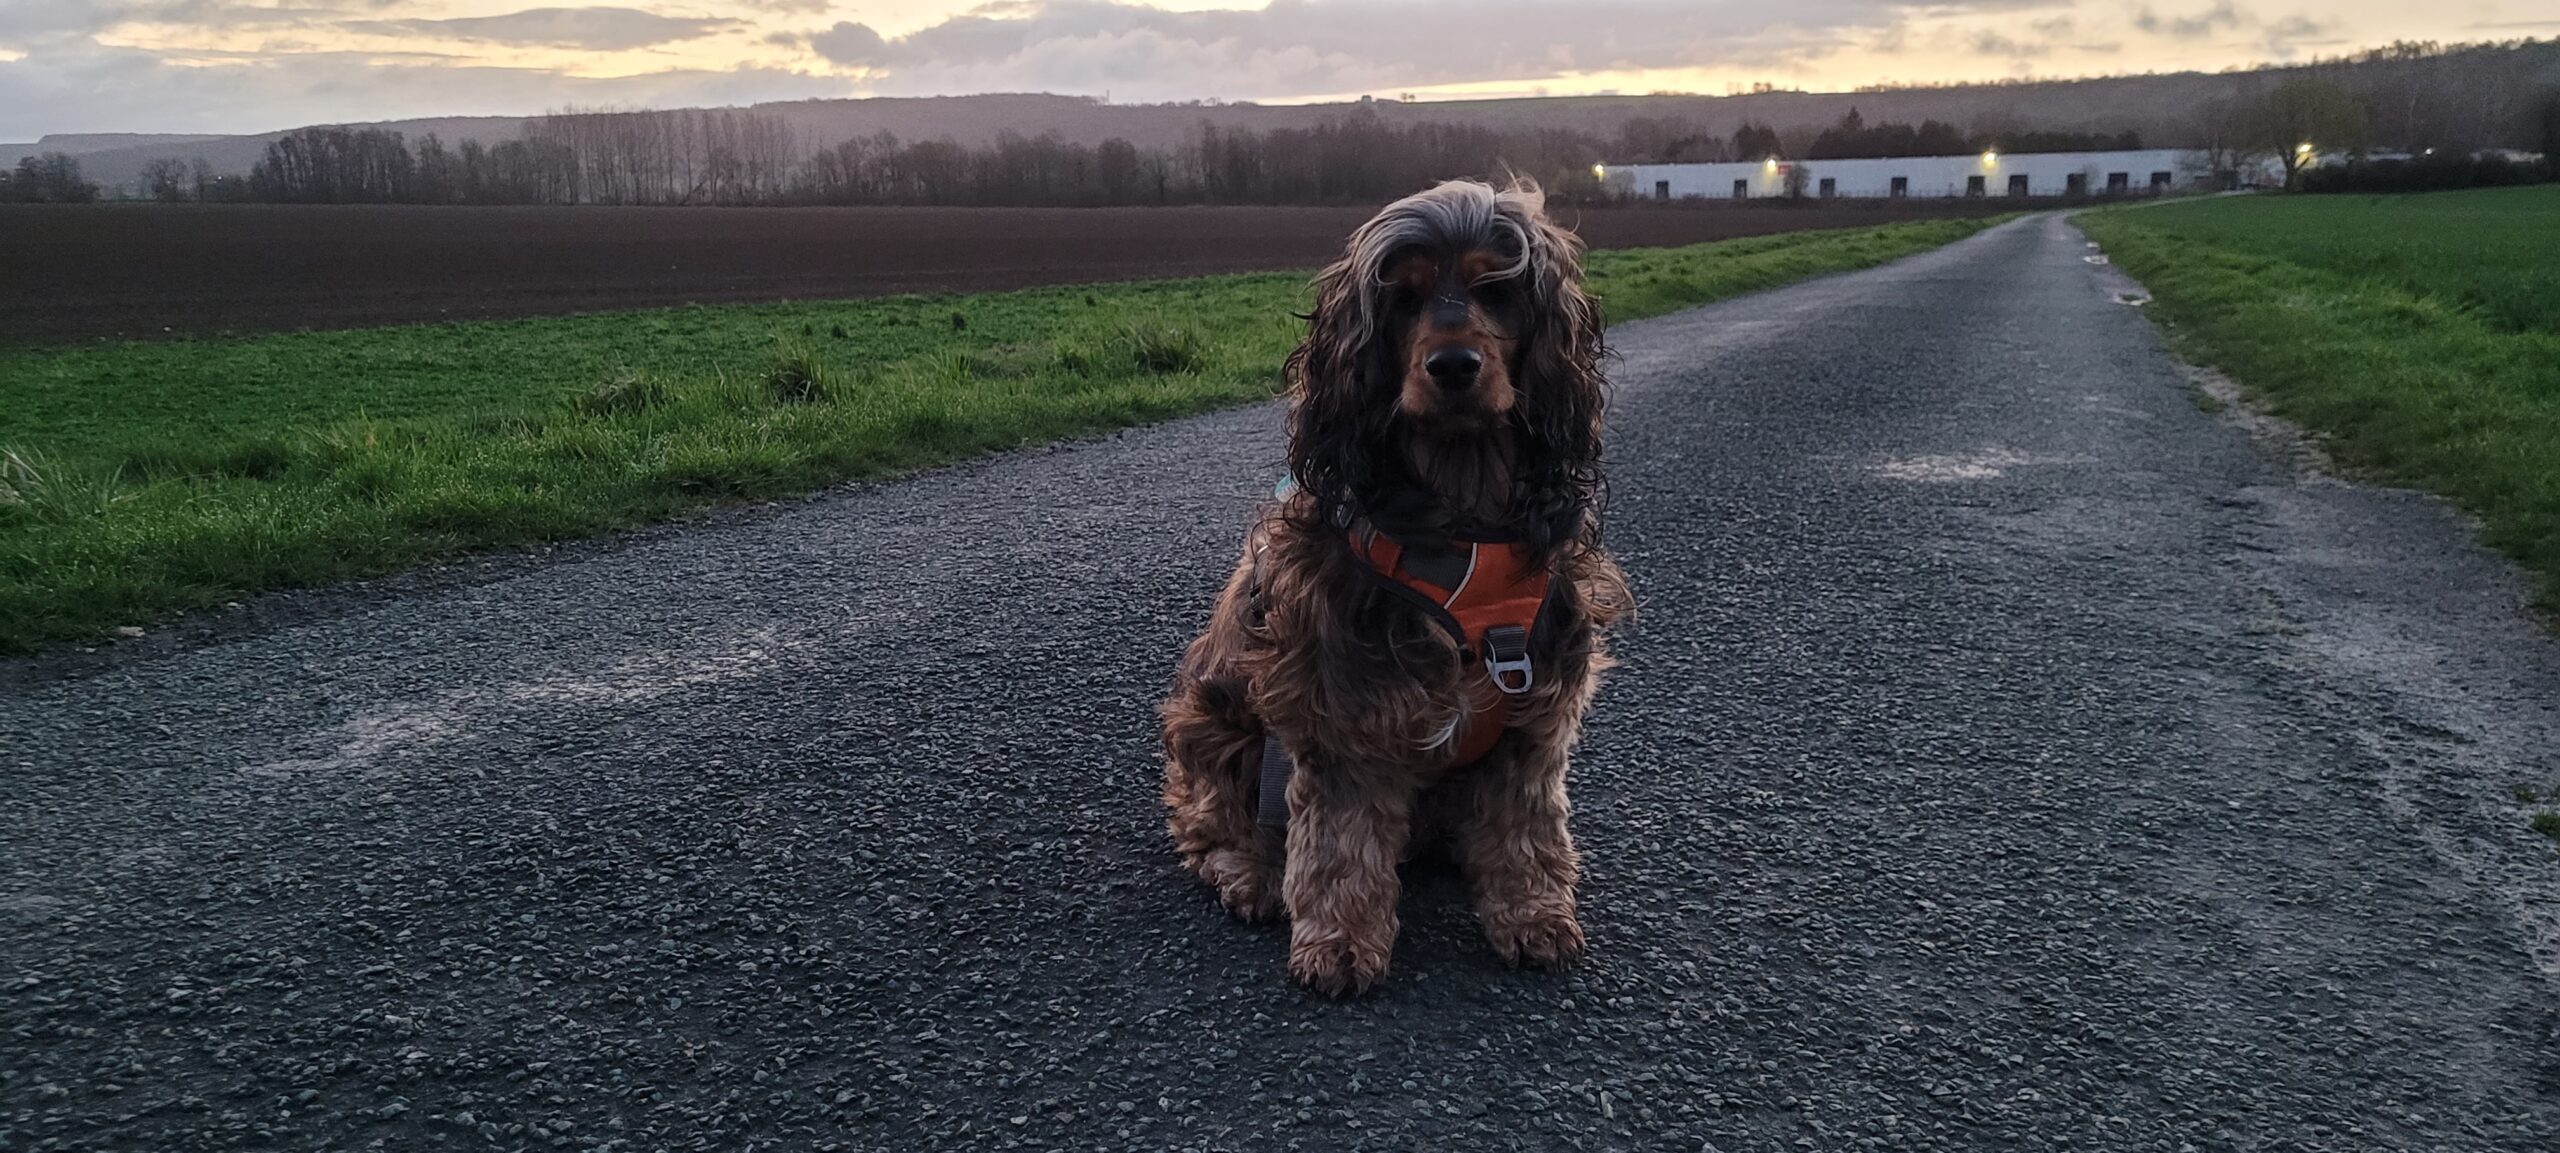 a black and tan sable english cocker spaniel wearing a bright orange harness sitting outside at dawn, backlit by a yellow cloudy sky